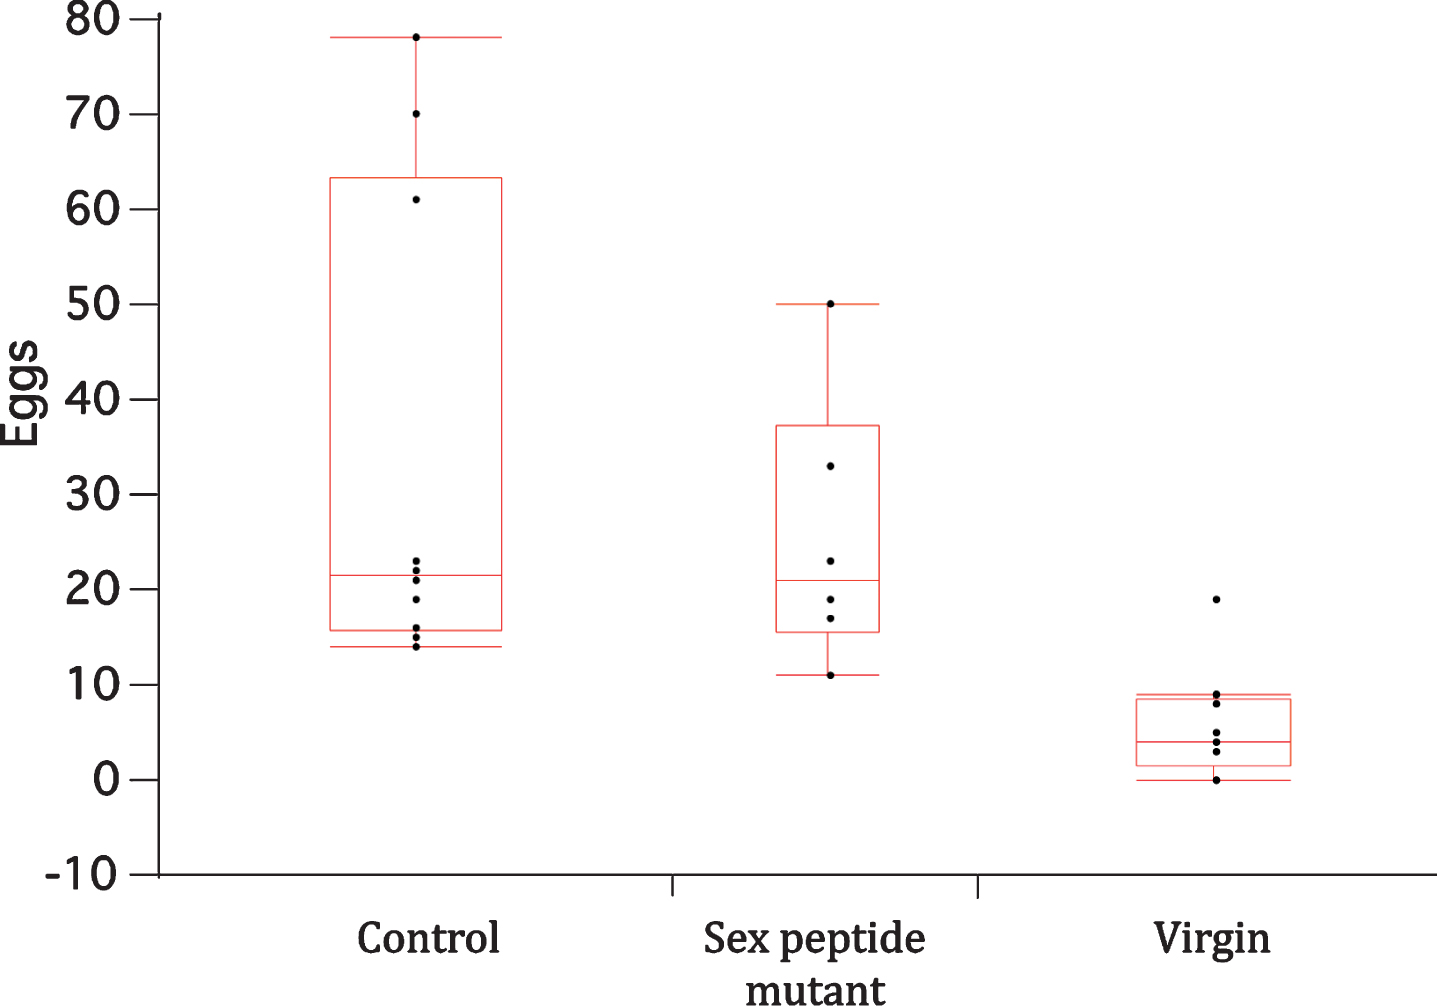 Box-whisker plots for eggs laid in CAFE vials by wildtype females once mated to wildtype males (control) or to males lacking sex peptide (sex peptide mutant), or when unmated (virgin). Points represent total number of deposited eggs in the first three days of the CAFE trial. Means among the mated females did not significantly differ, while means of both mated female groups differed from that of unmated females (Dunnett’s multiple comparison with α= 0.05).